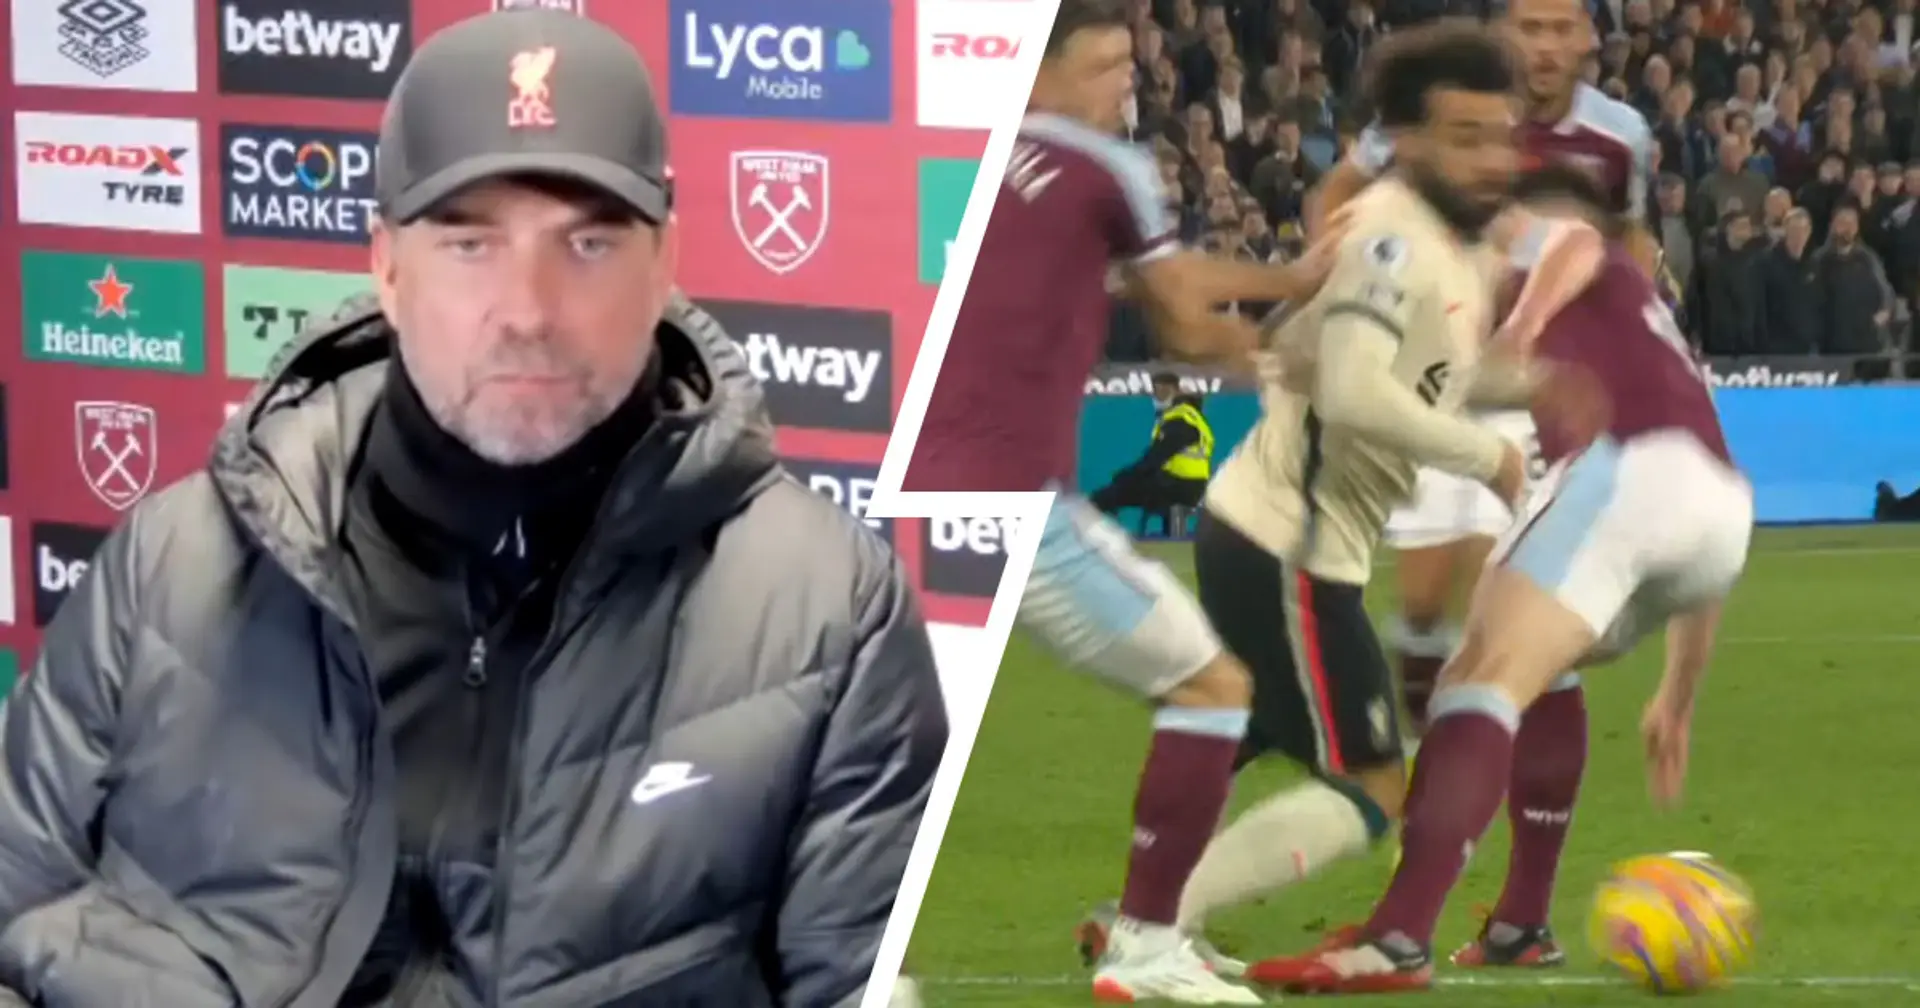 'I didn't see it': Klopp responds to claims of Salah's dive in West Ham loss